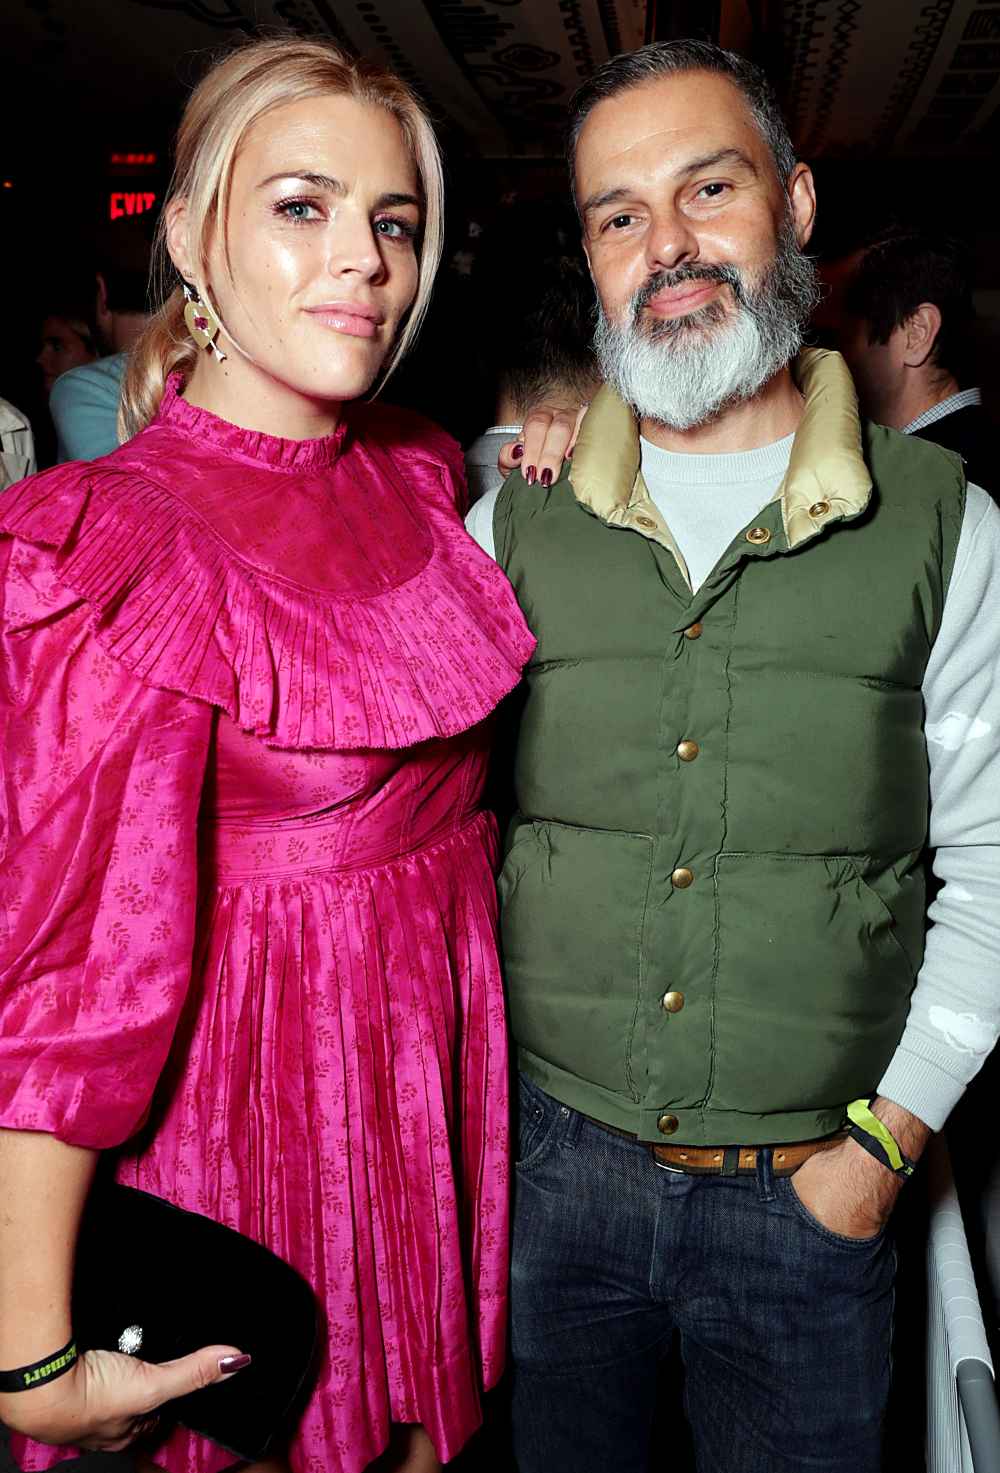 Busy Philipps Admits Not Getting Along With Her Husband During Quarantine